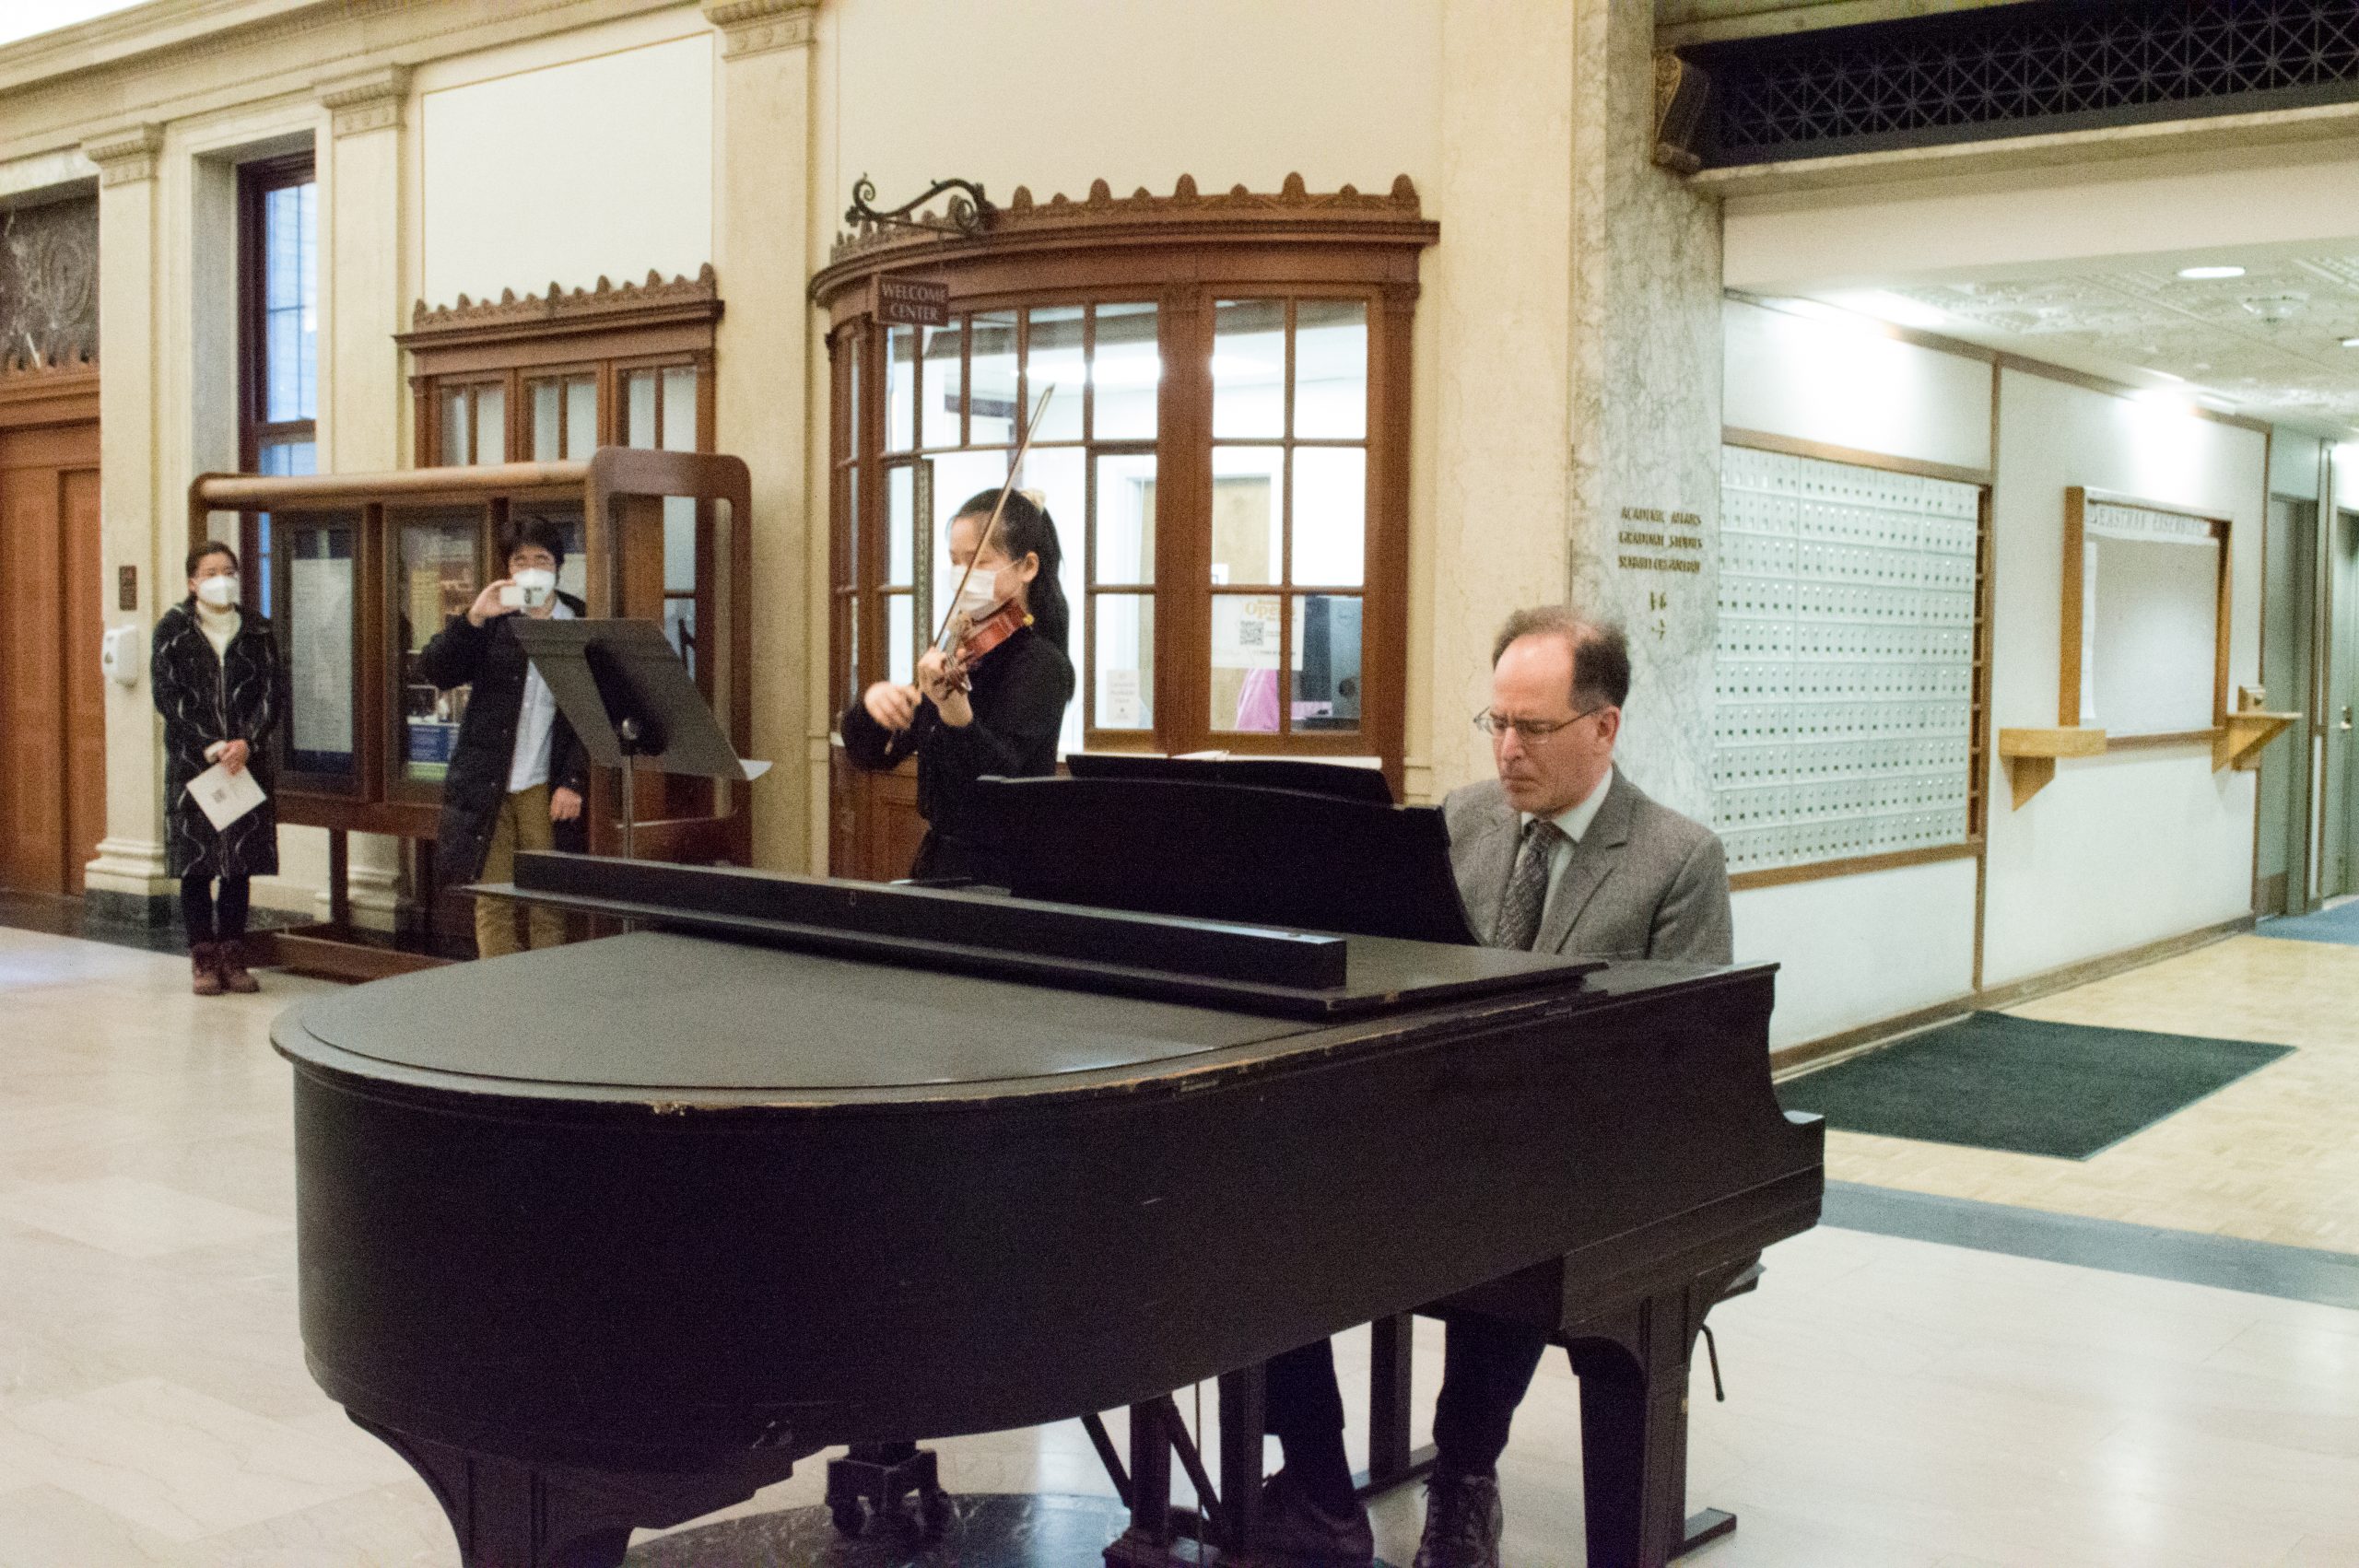 DMA student violinist Junheng Chen and Professor of Music Theory David Temperley in Lowry Hall;